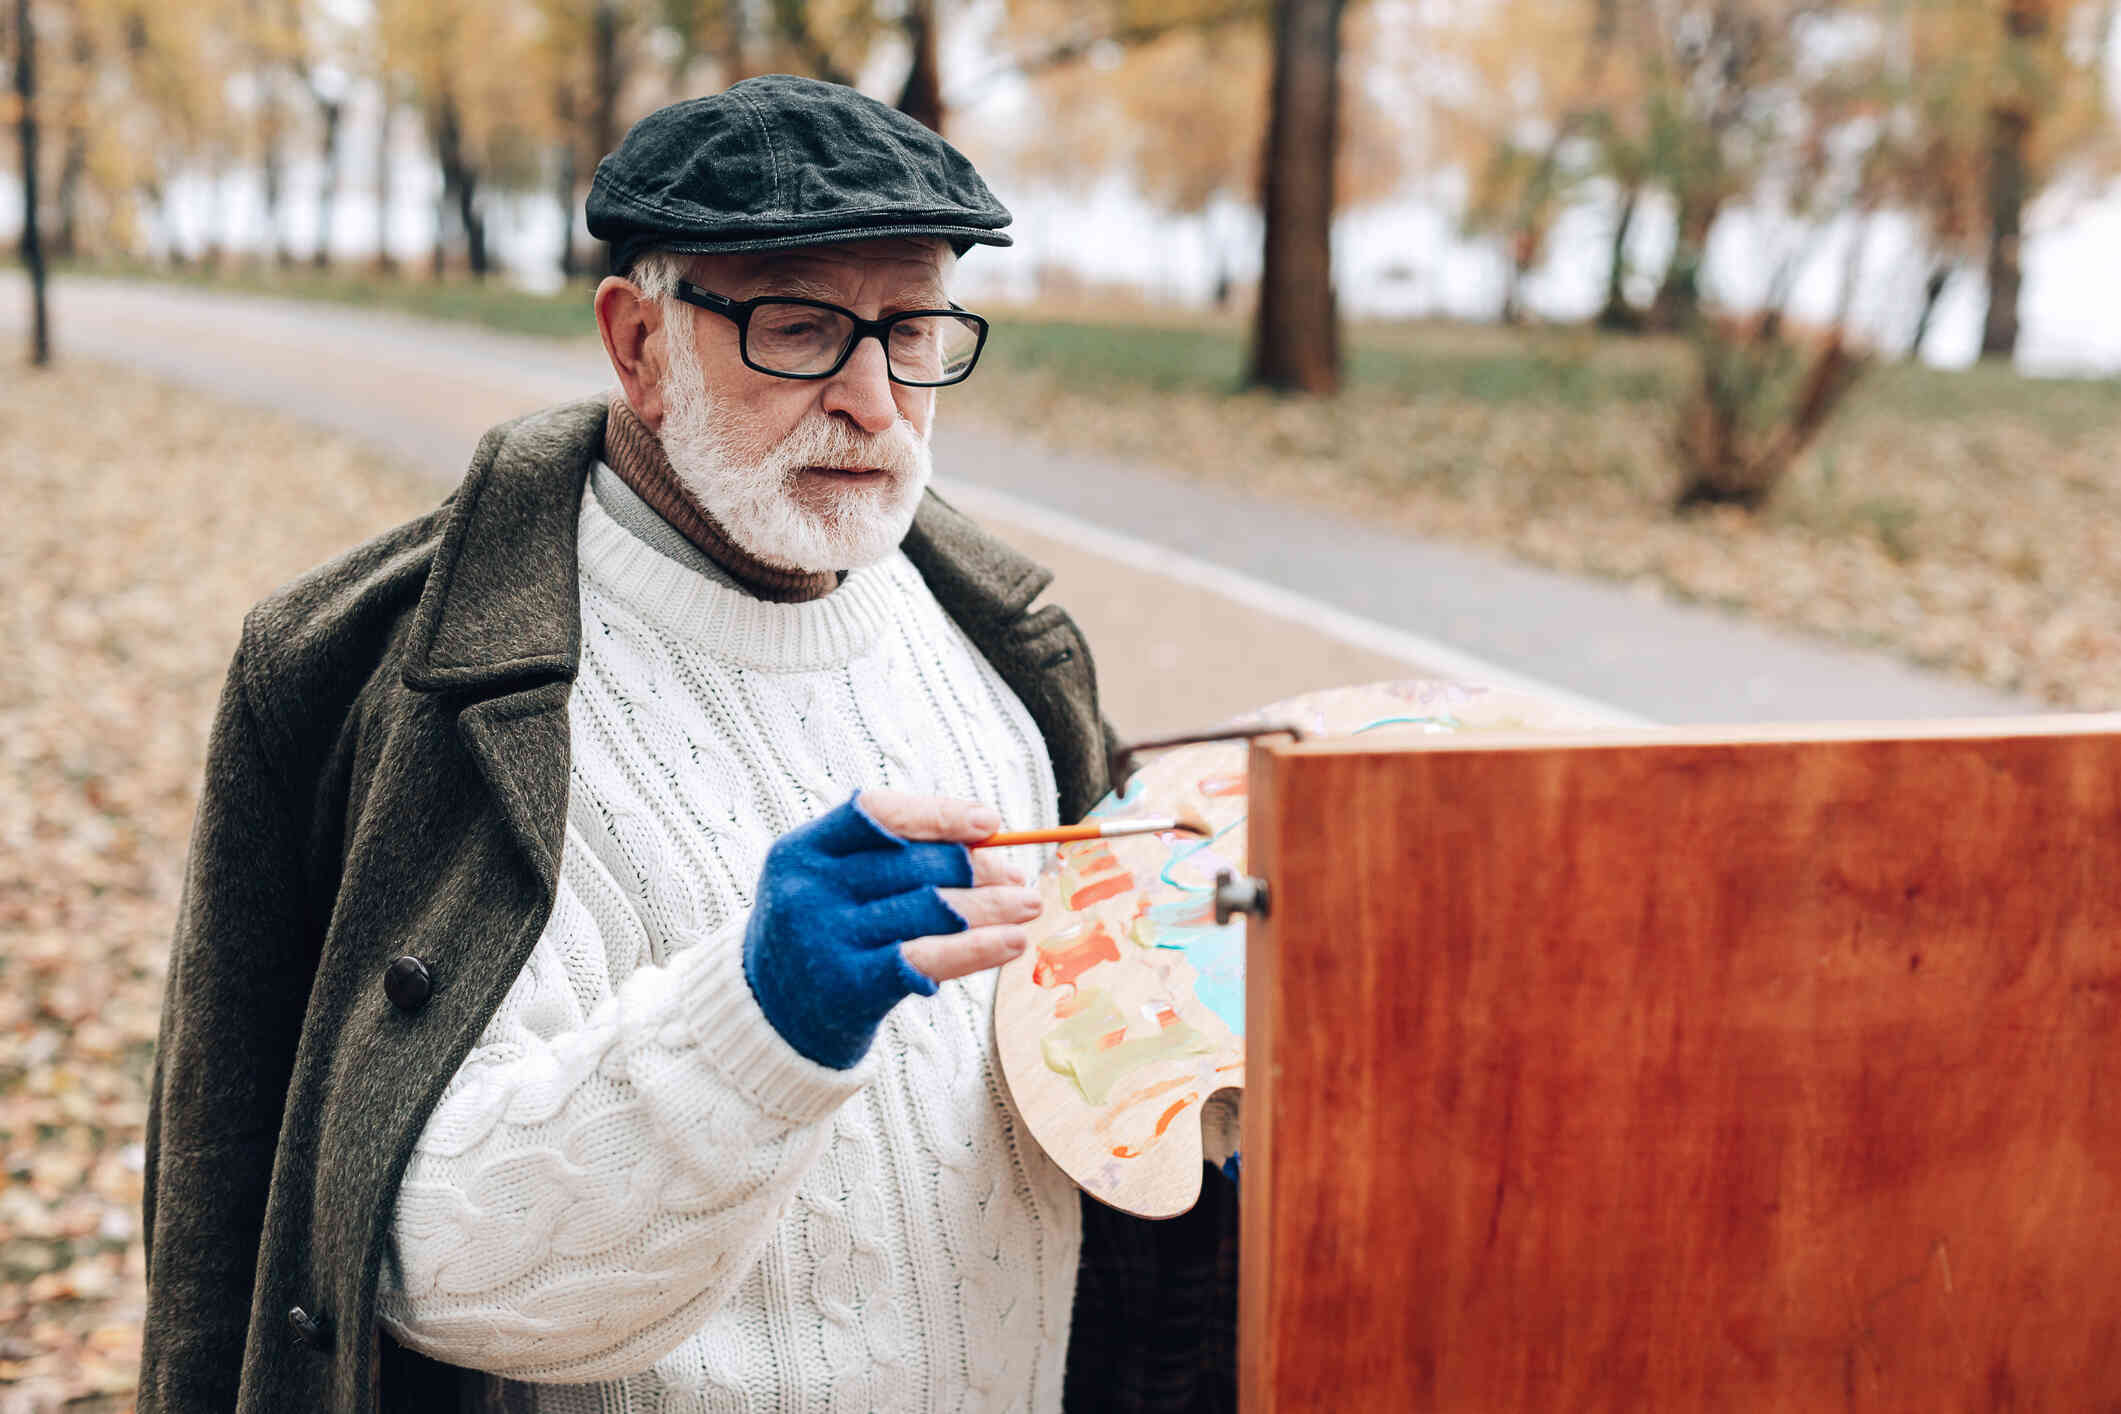 A mature amn with glasses stands outside with a paintbrush and paints on an easle.